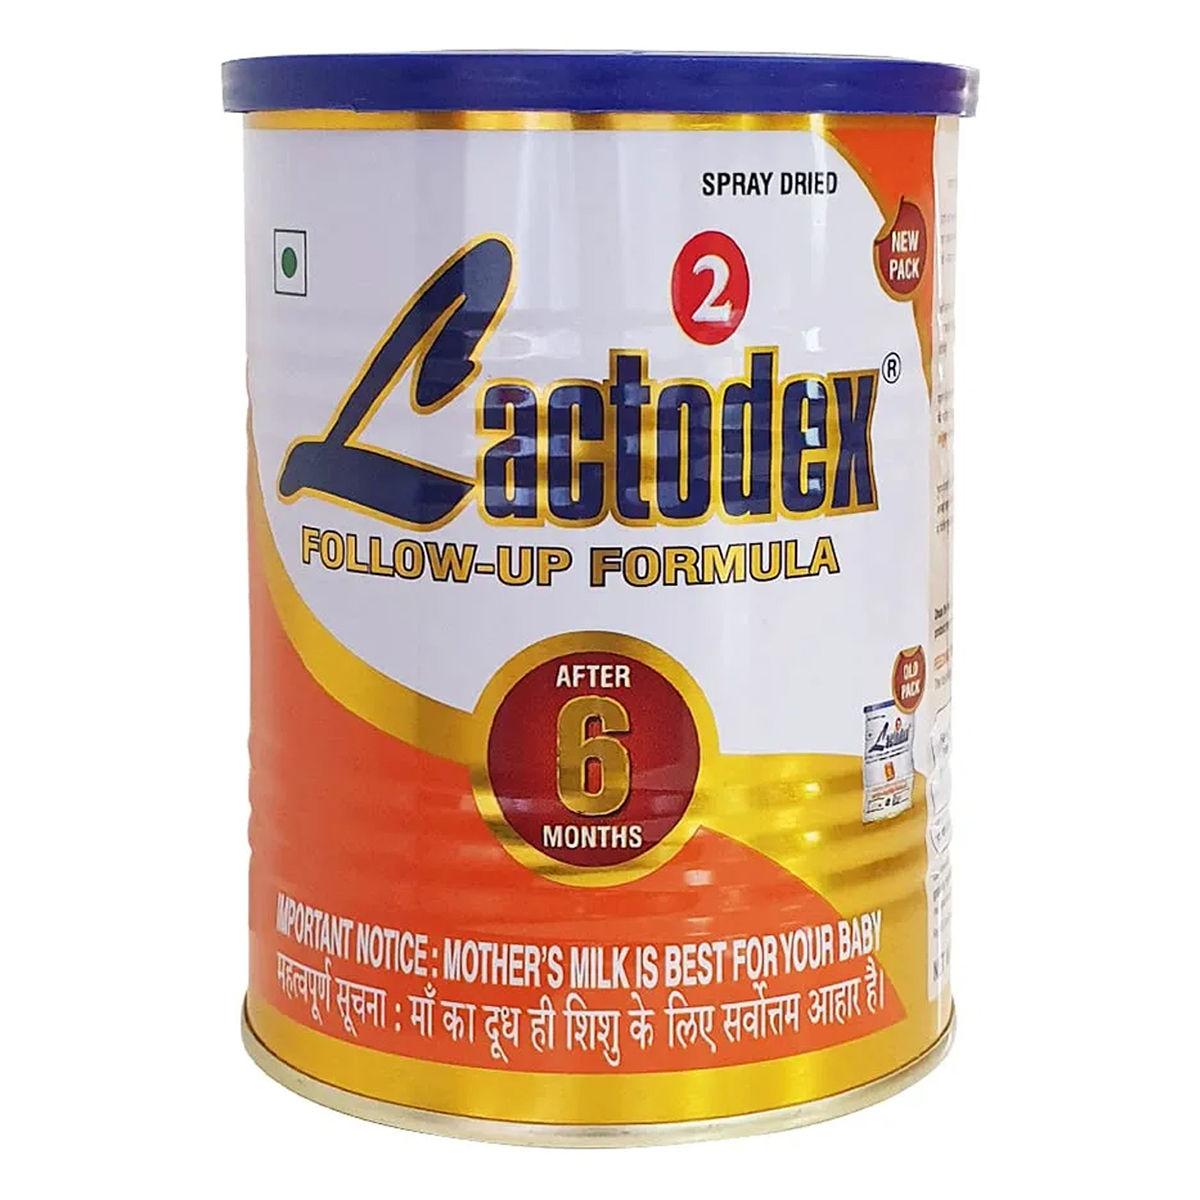 Nestle Nan Pro 1 Infant Formula With Probiotic Up To 6 Months, Stage 1-400g  Bag-In-Box Pack at Rs 674/pack, नेस्ले मिल्क पाउडर in Santipur